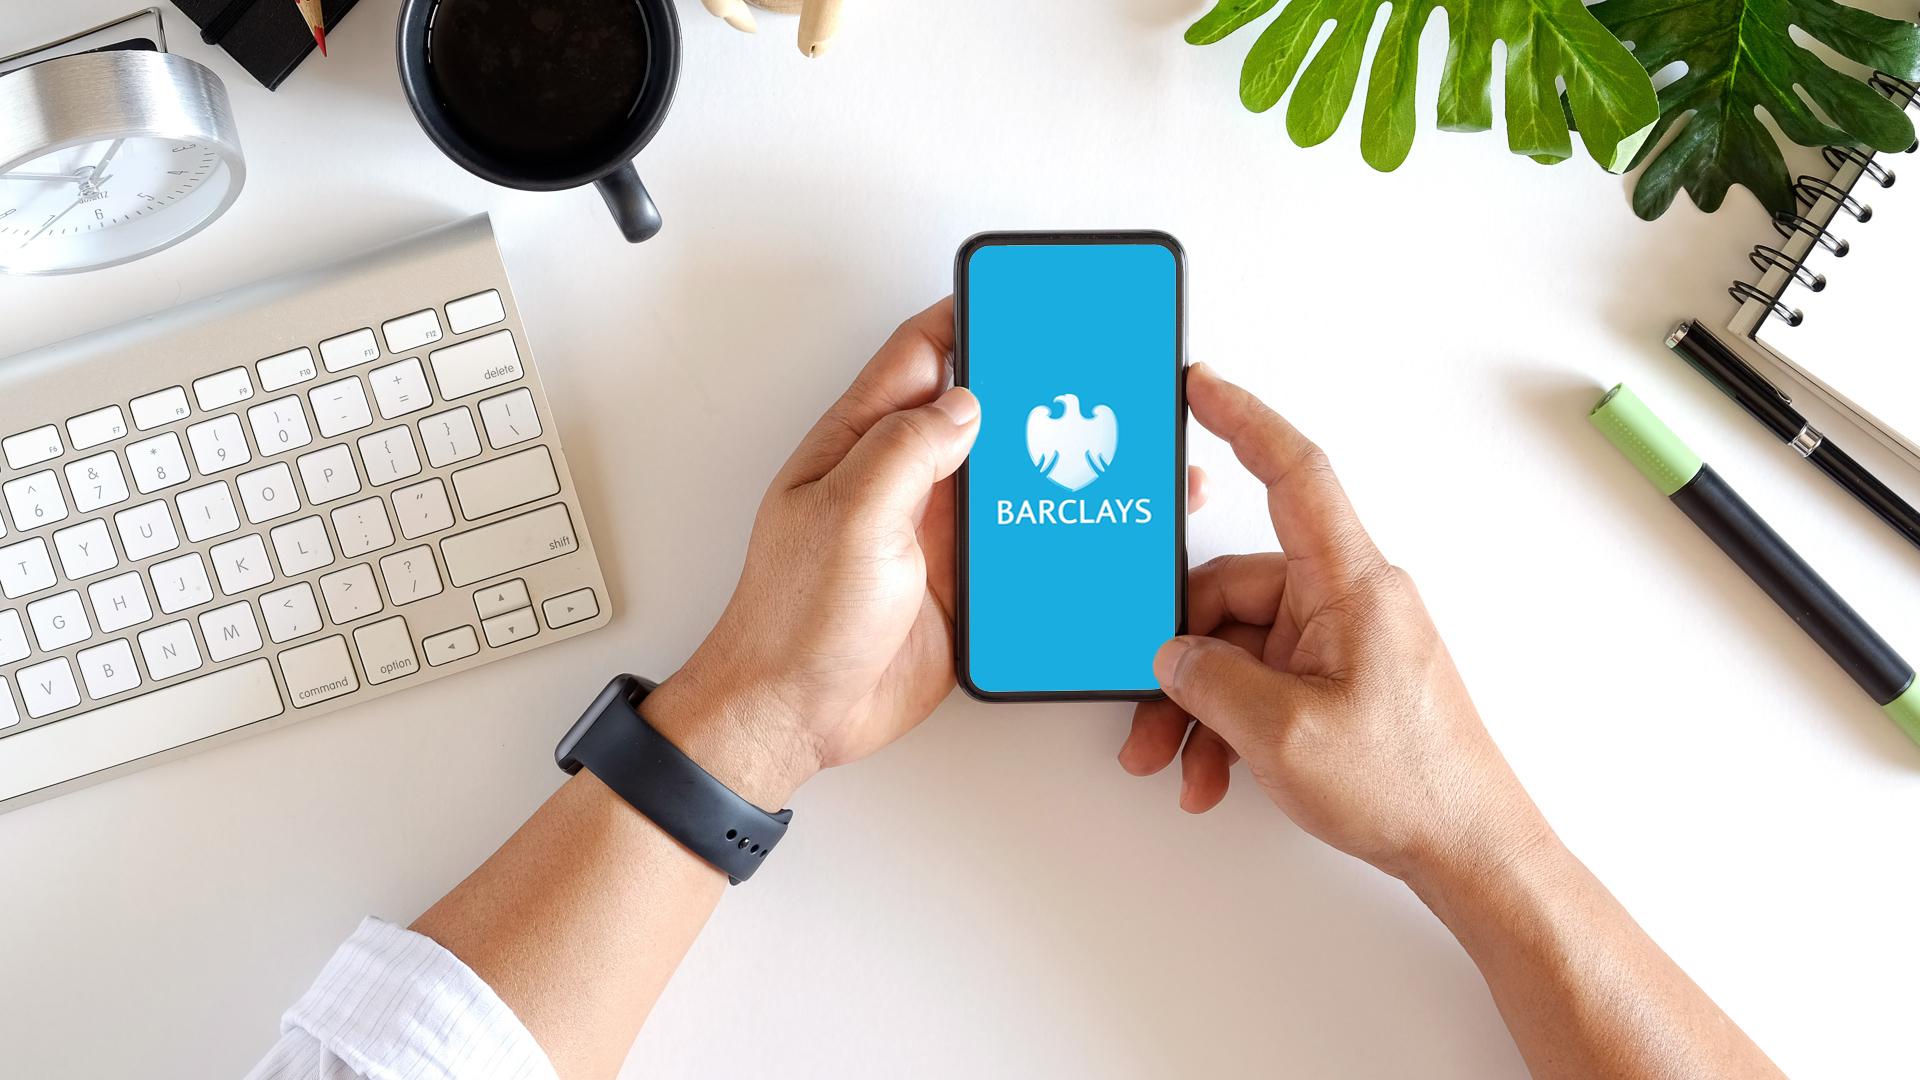 Barclays mobile banking app